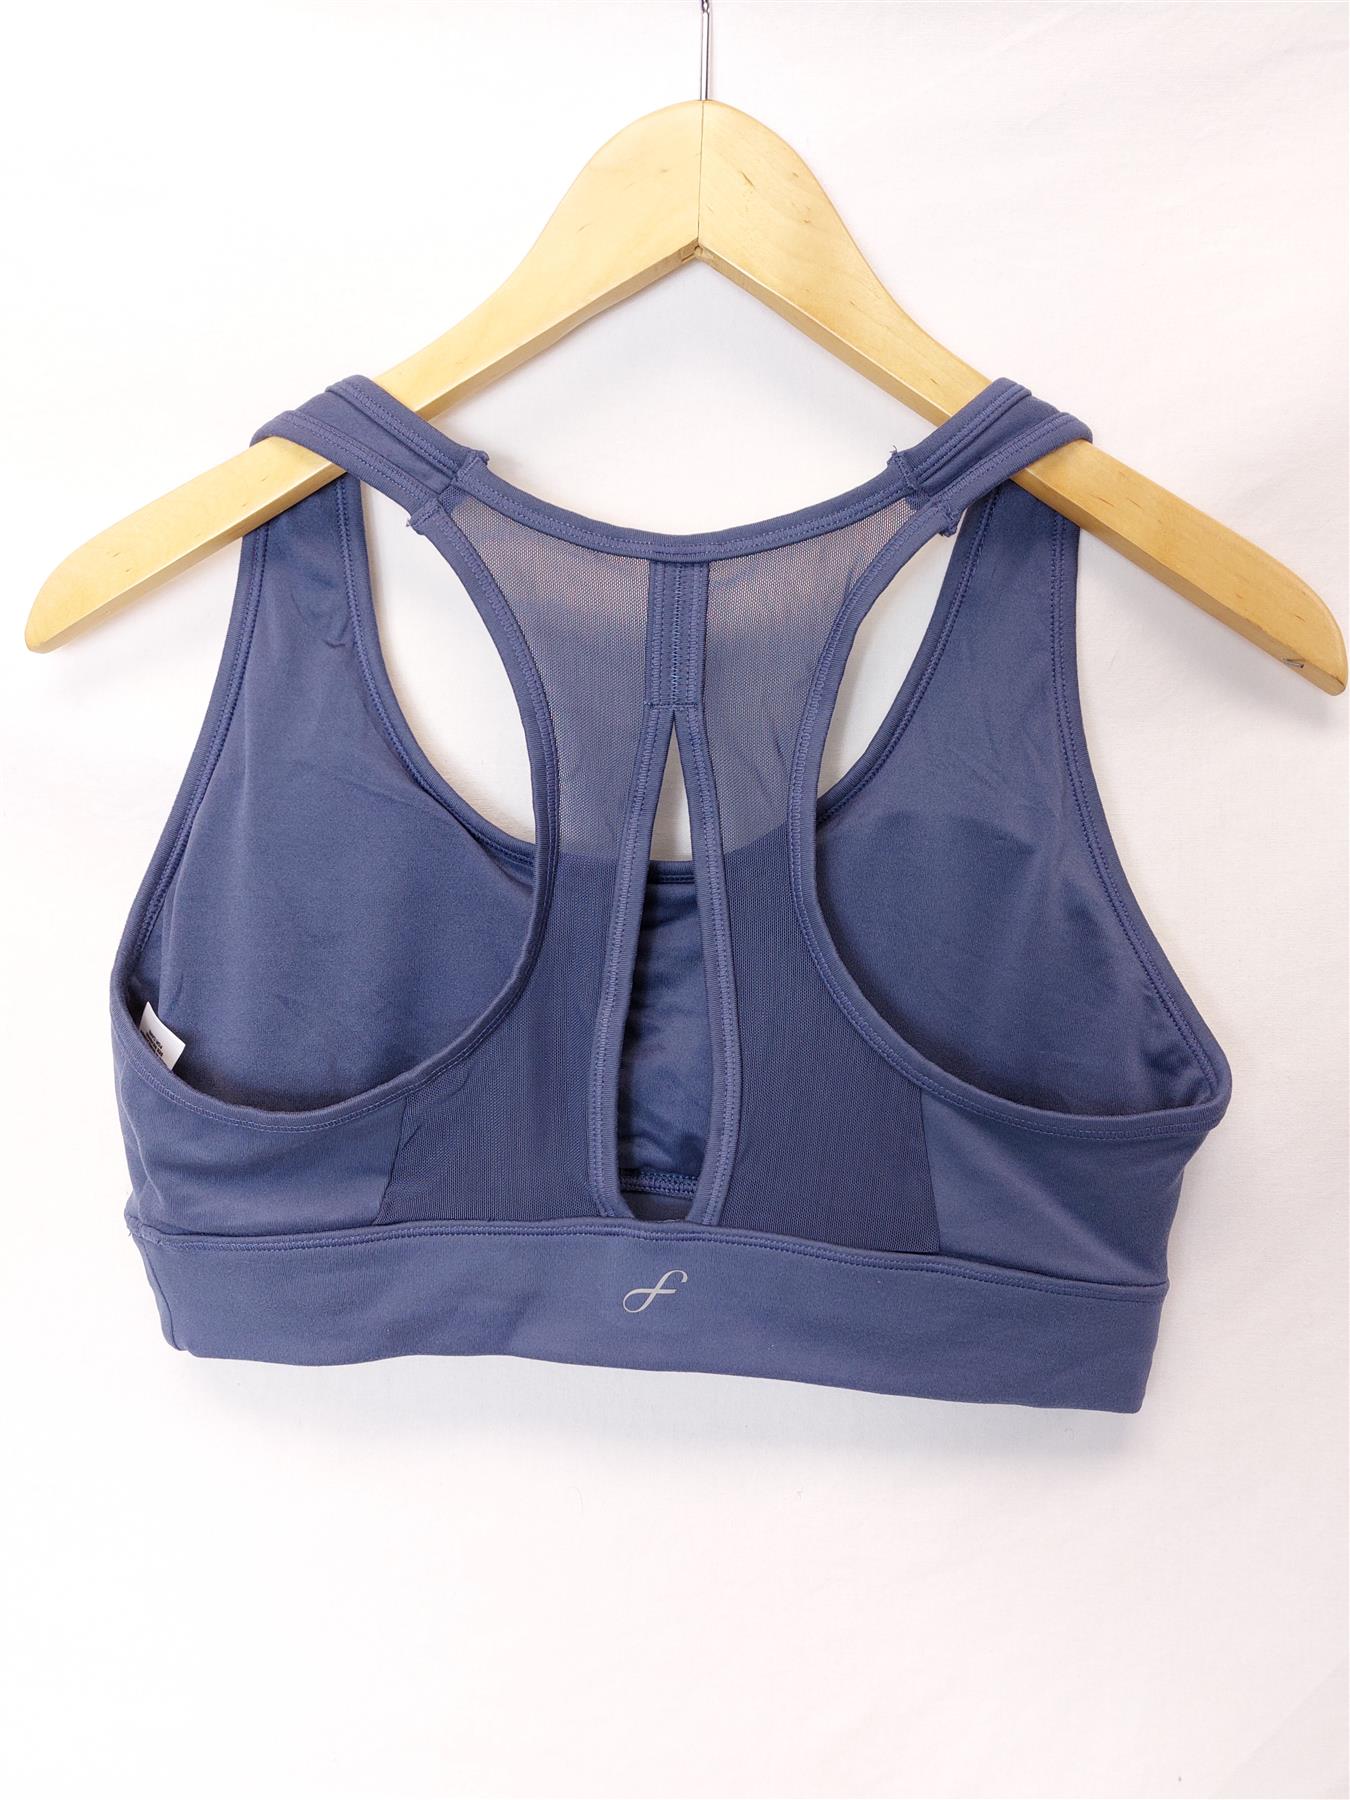 Yoga Top Sports Bra Freely Academy Non-Wired Removable Padding Medium Impact Gym